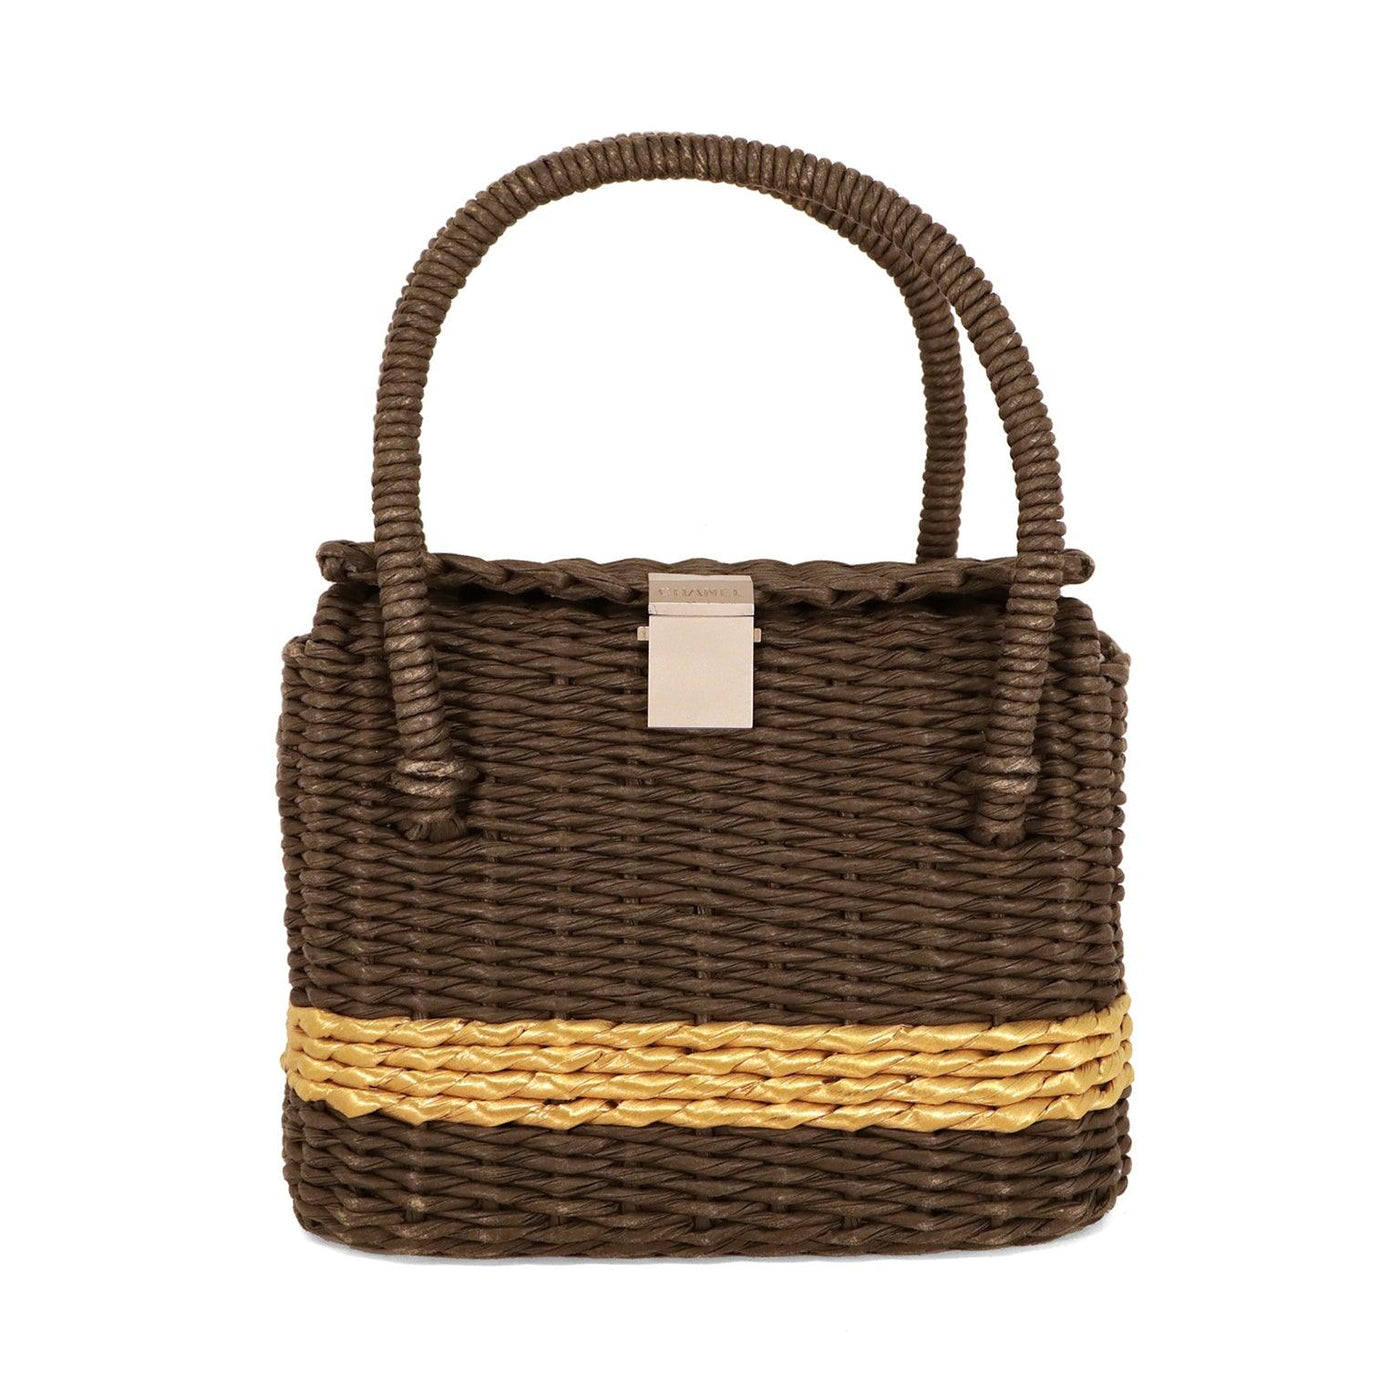 Chanel Black and Gold Wicker Basket Bag - Only Authentics